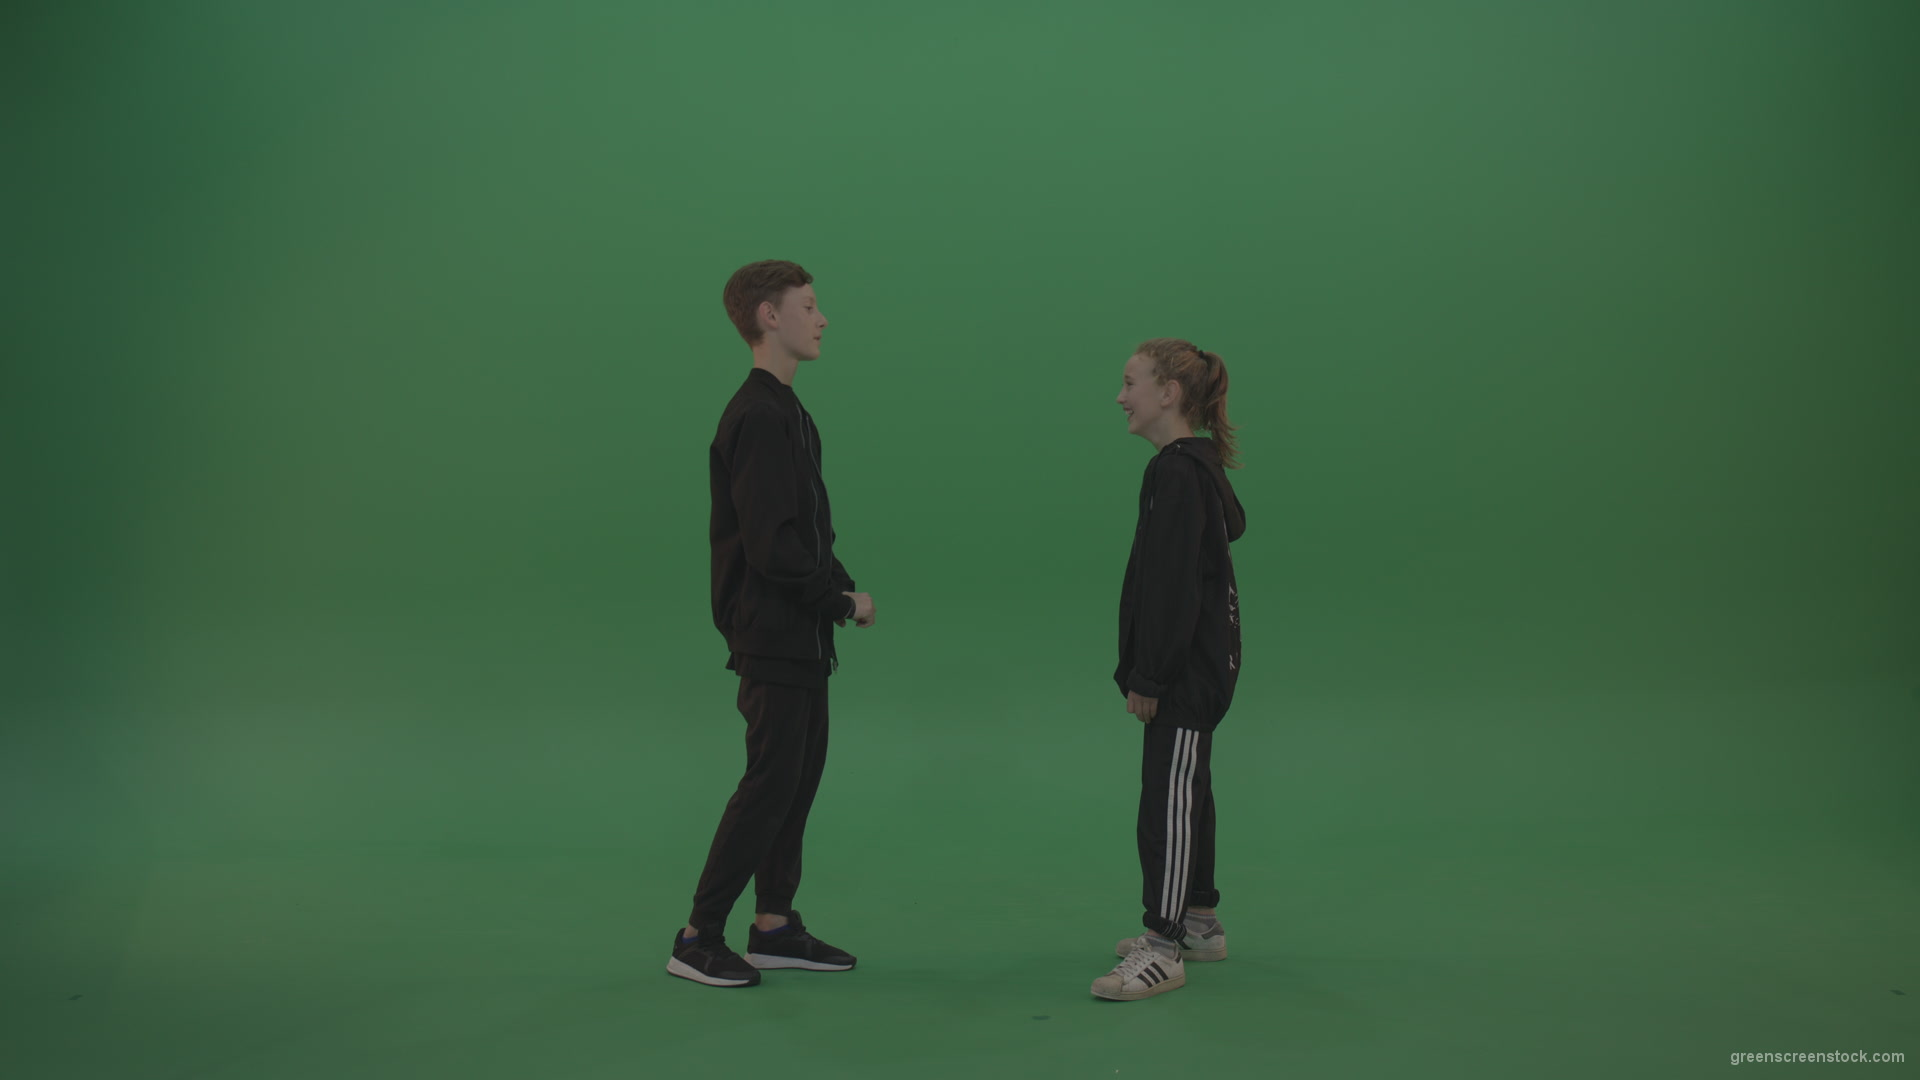 Boy-in-black-wear-talks-to-girl-over-chromakey-background_008 Green Screen Stock